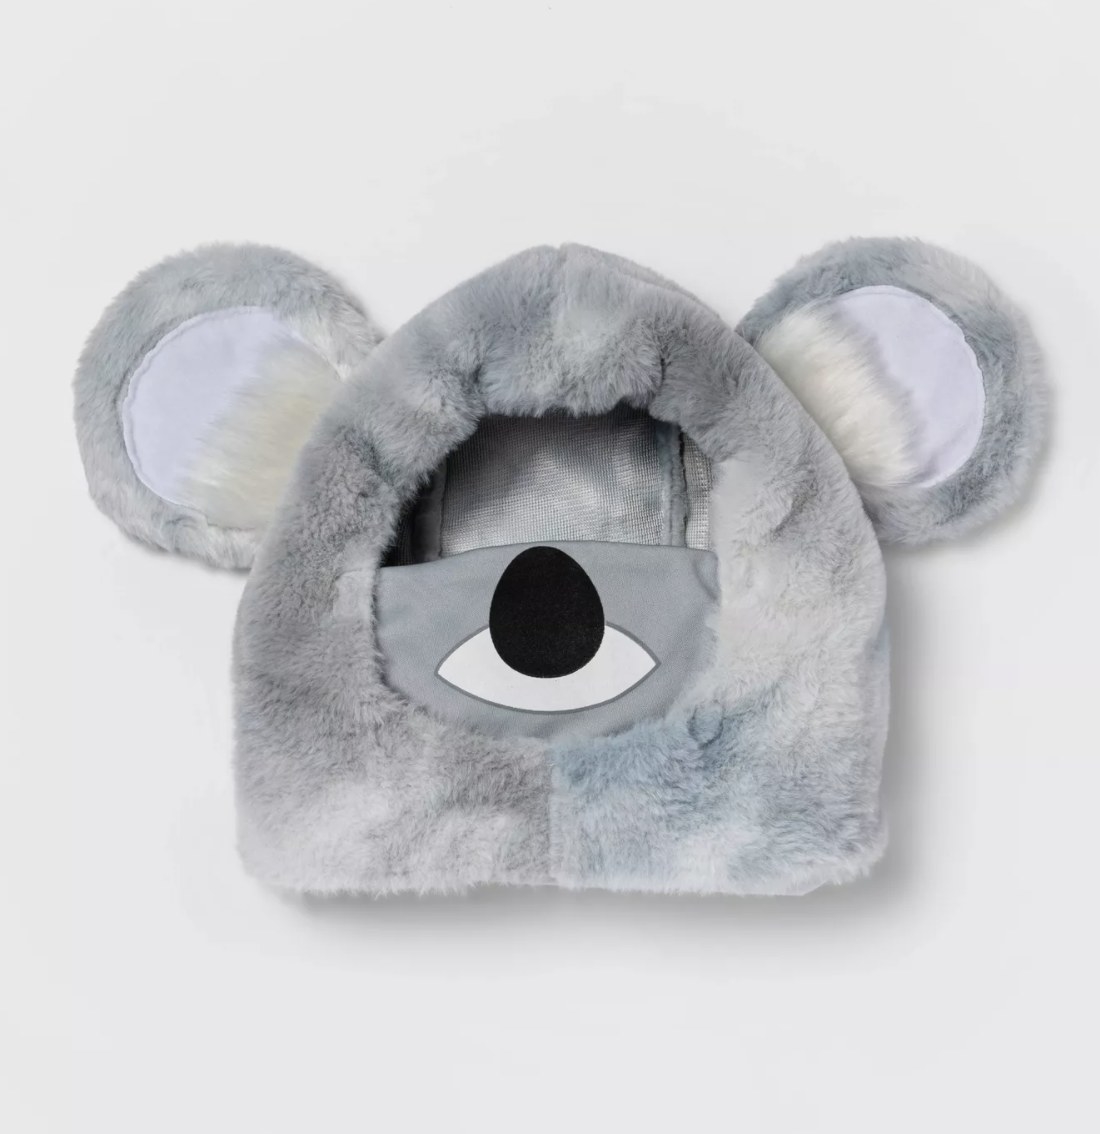 The grey fuzzy headpiece has white tufted ears and a grey mask with a nose and mouth